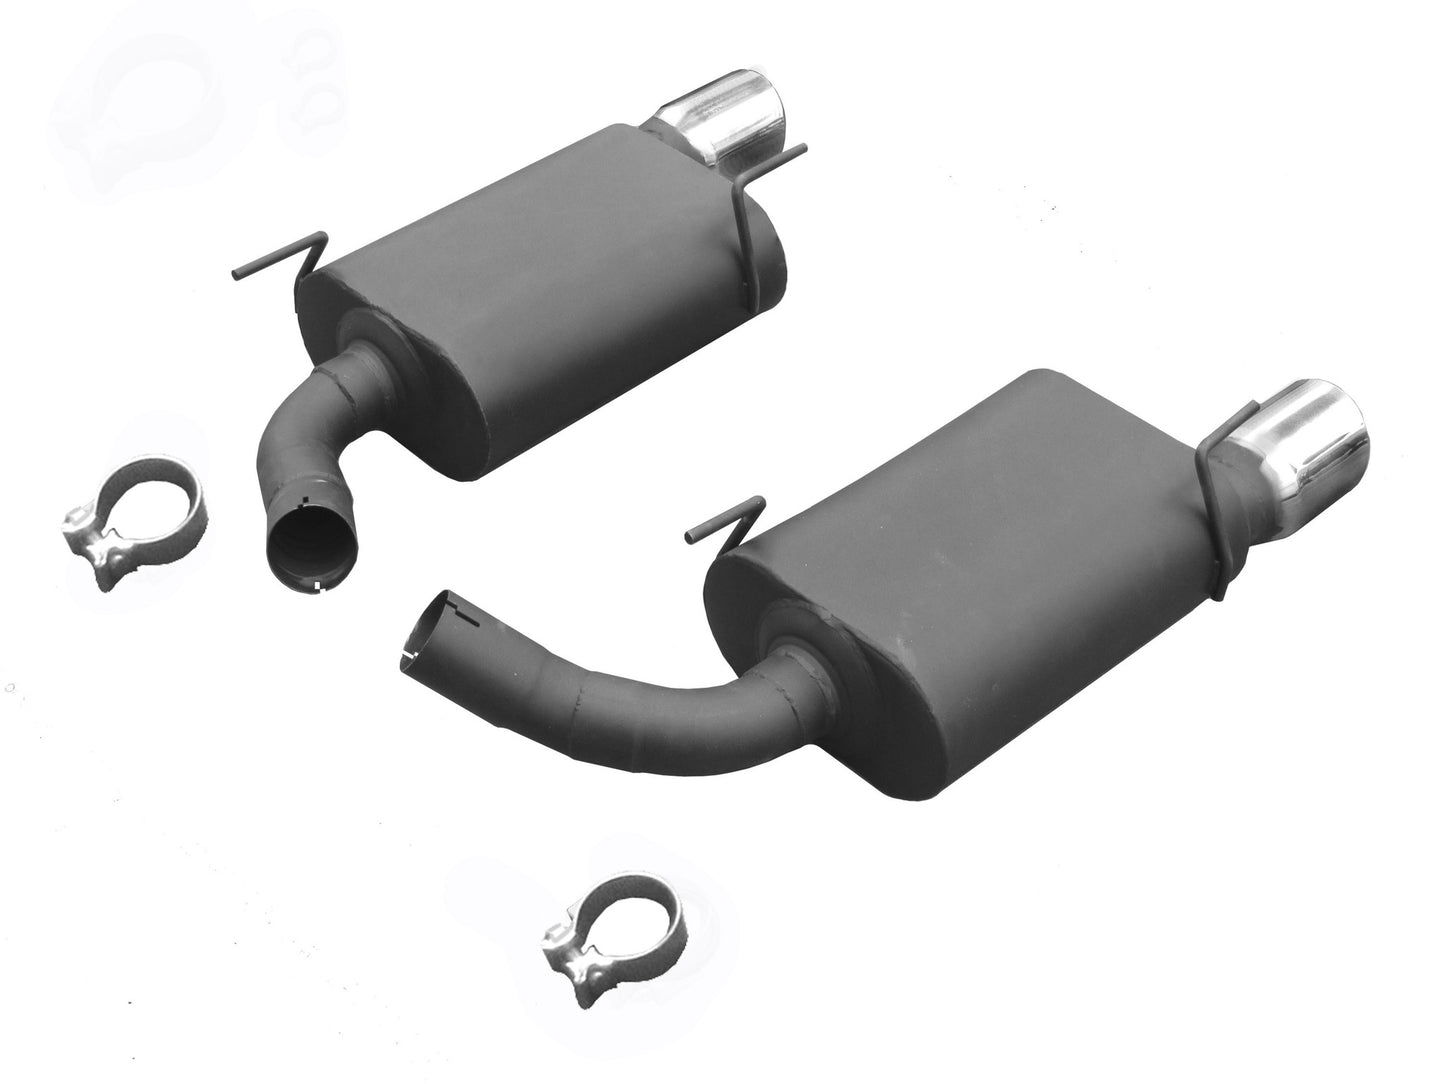 Ford Mustang GT V8 Axle Back Exhaust Kit 2005-2010 - Buy Online